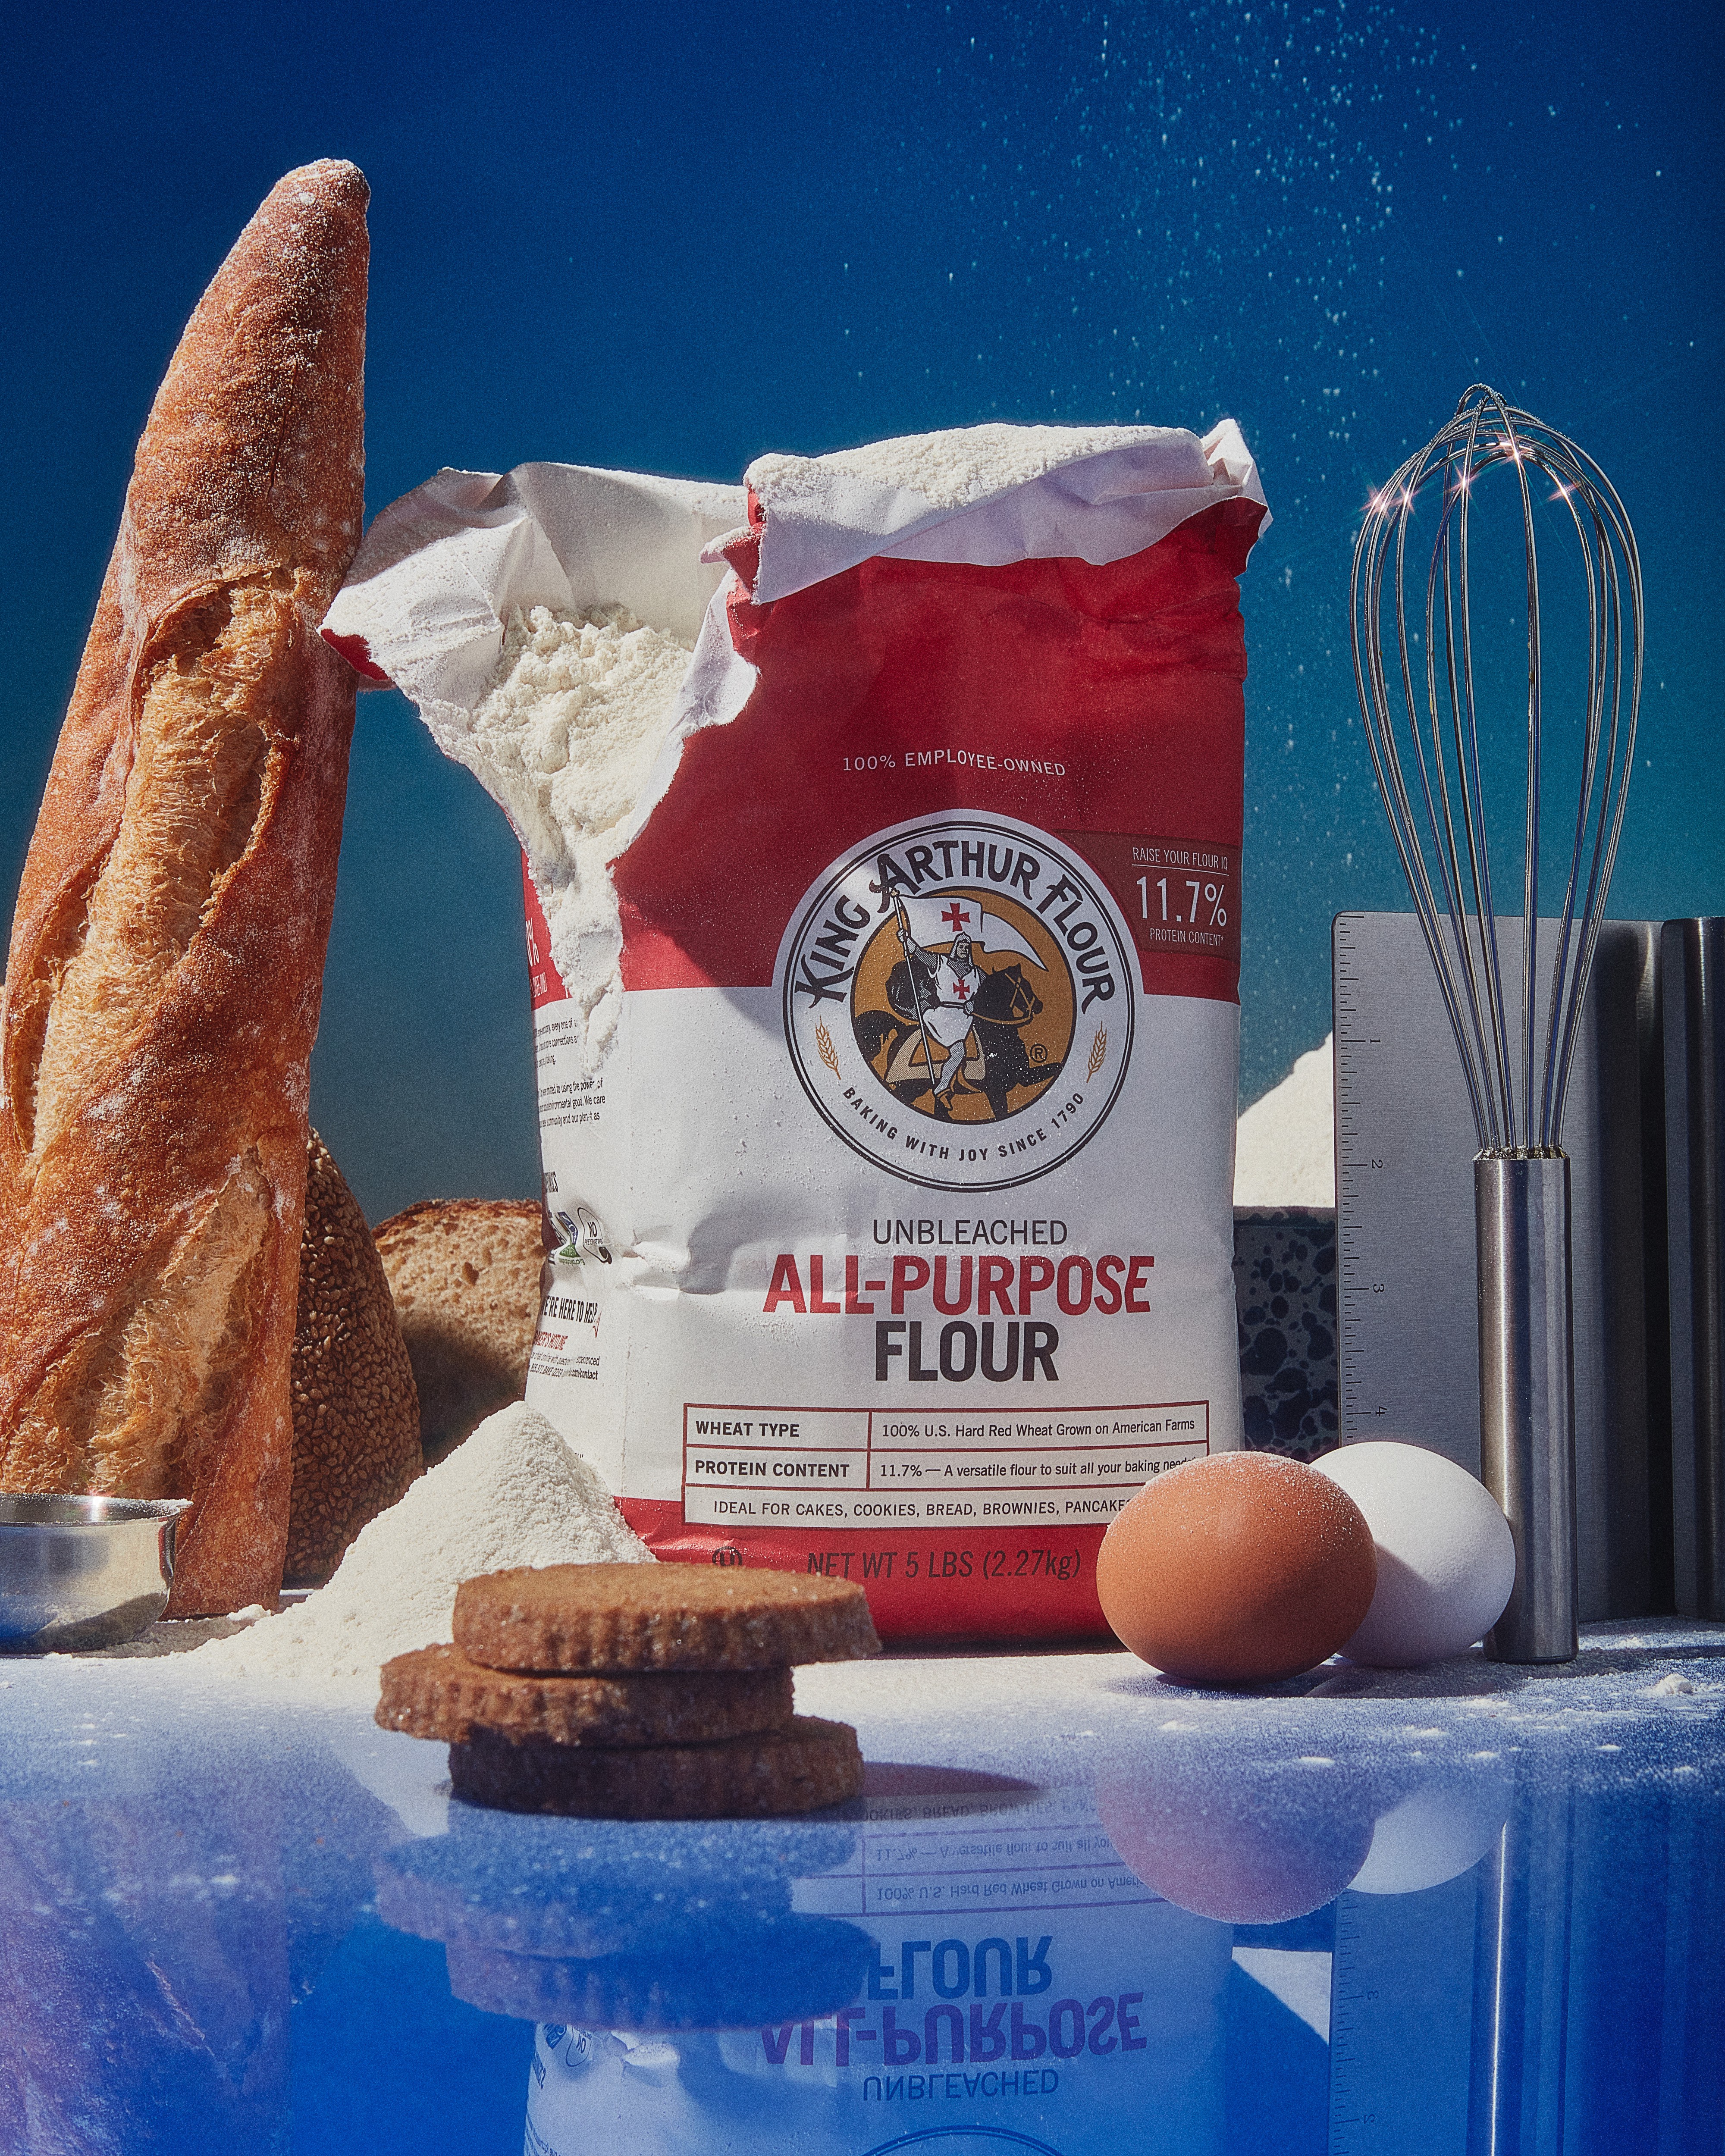 A bag of King Arthur Flour propped up next to a baguette, eggs, and a whisk.